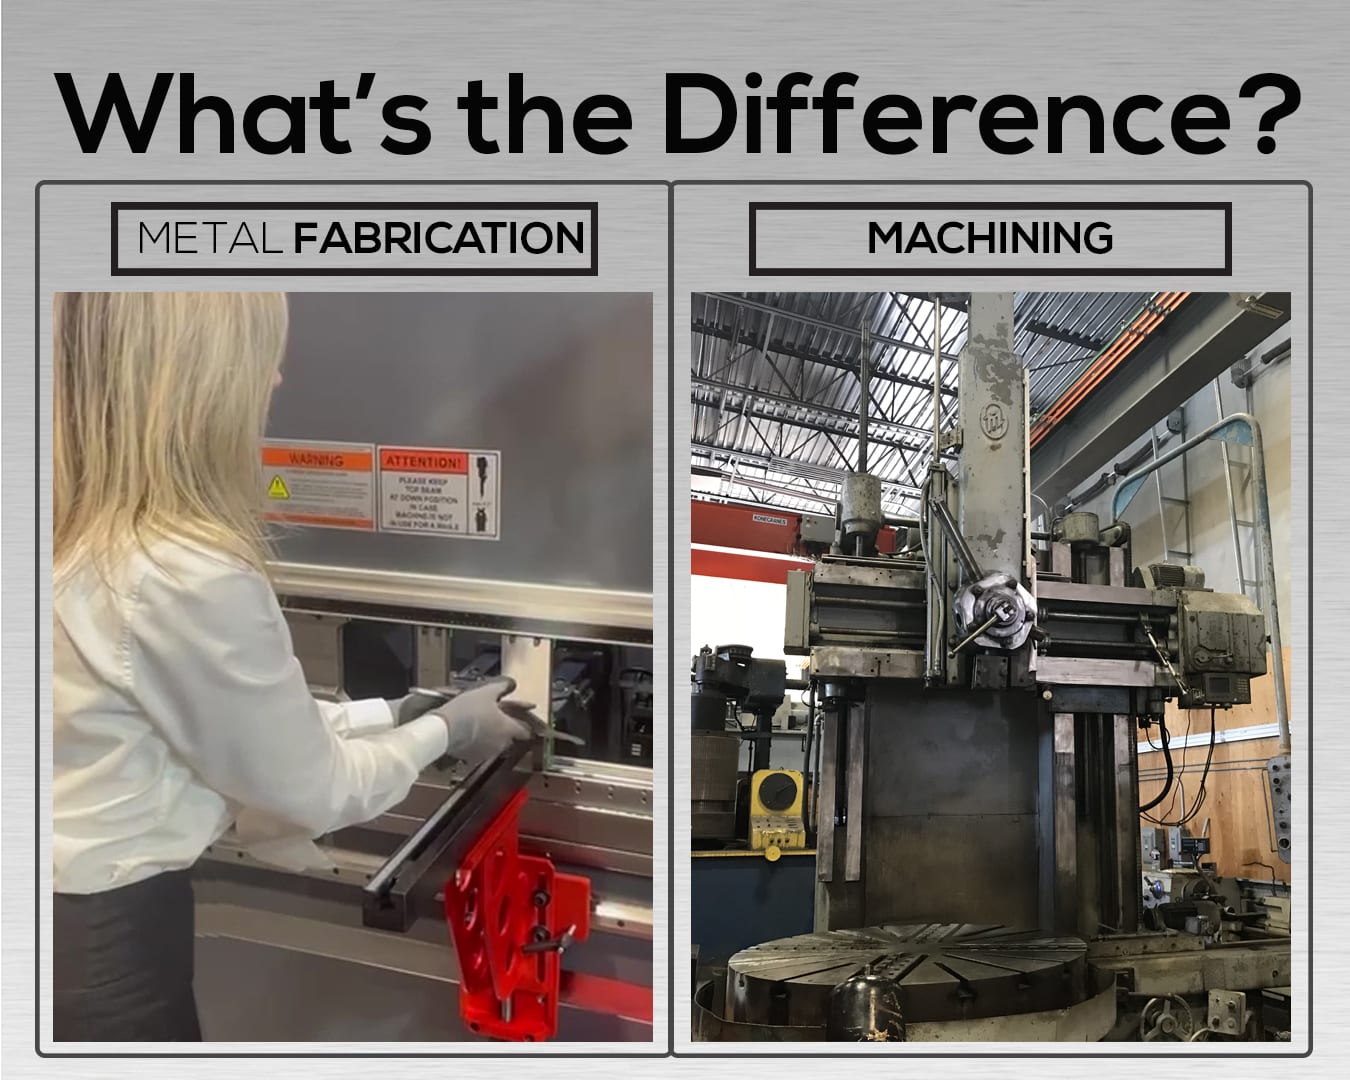 What Is the Difference Between Metal Fabrication and Machining?